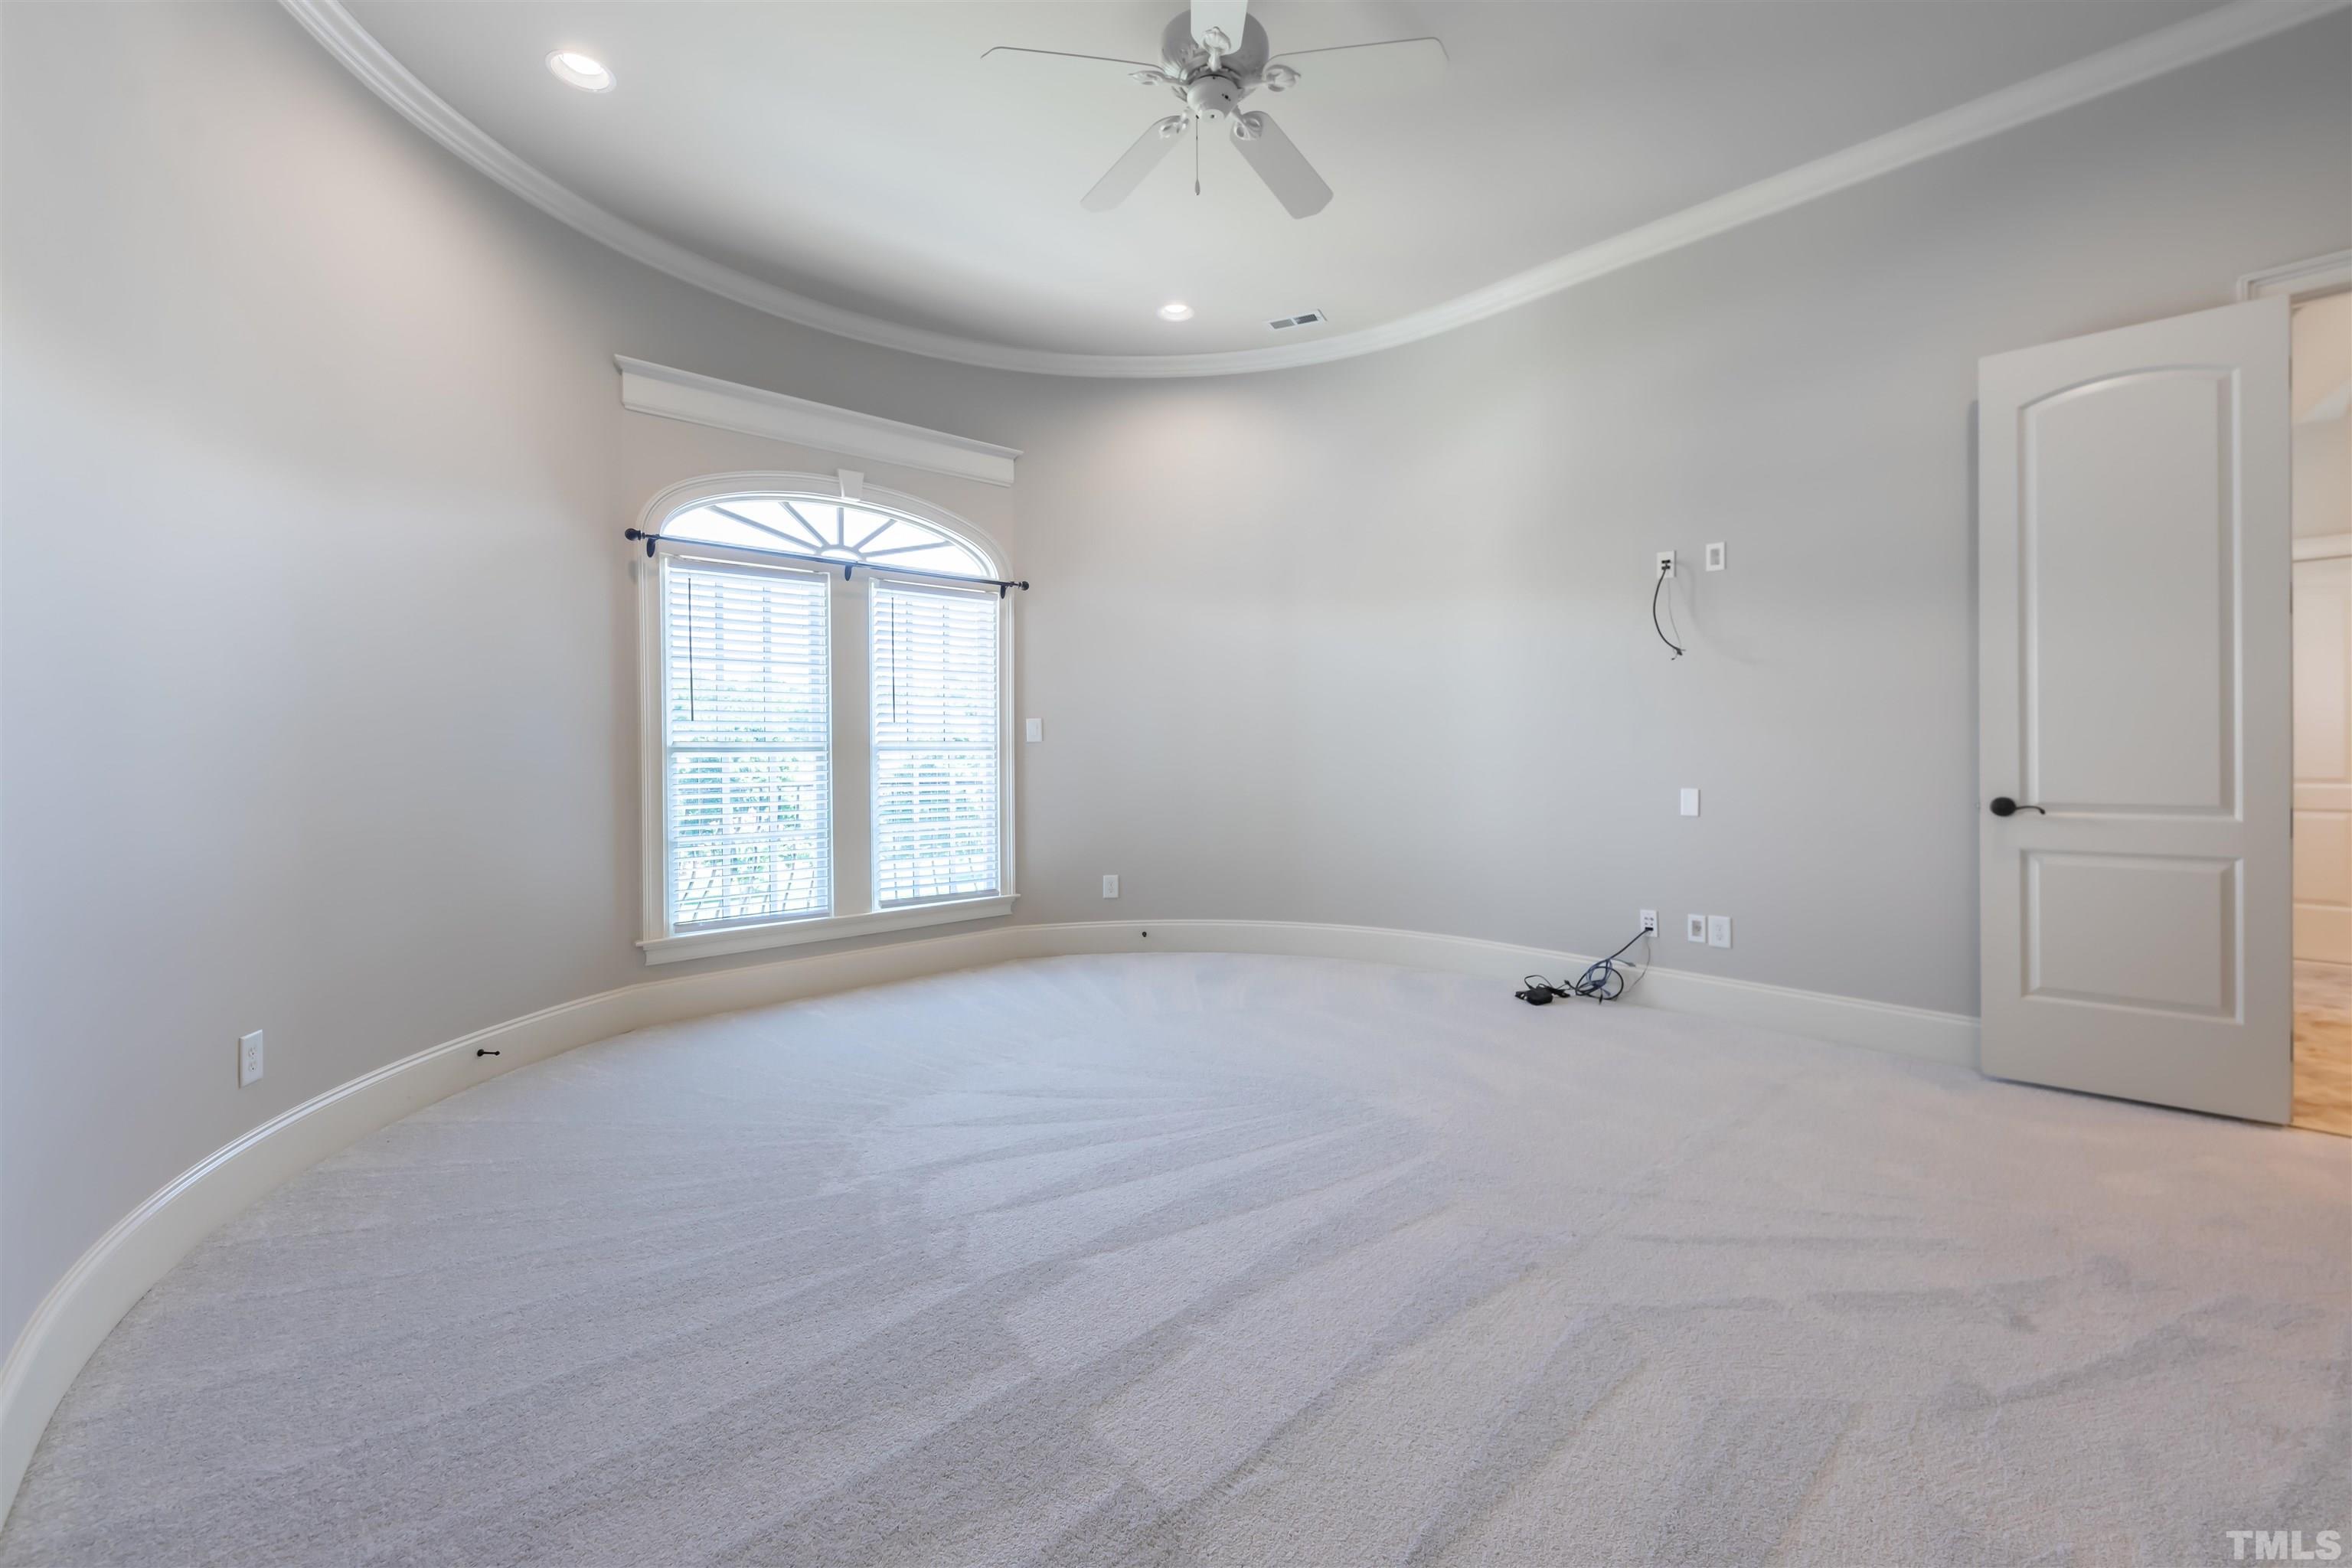 The secondary bedrooms are really large.  This front bedroom sits above the dining room and follows the curved wall of the turret.  High ceilings, crown molding, new carpet.  It has a large walk in closet and private bath.